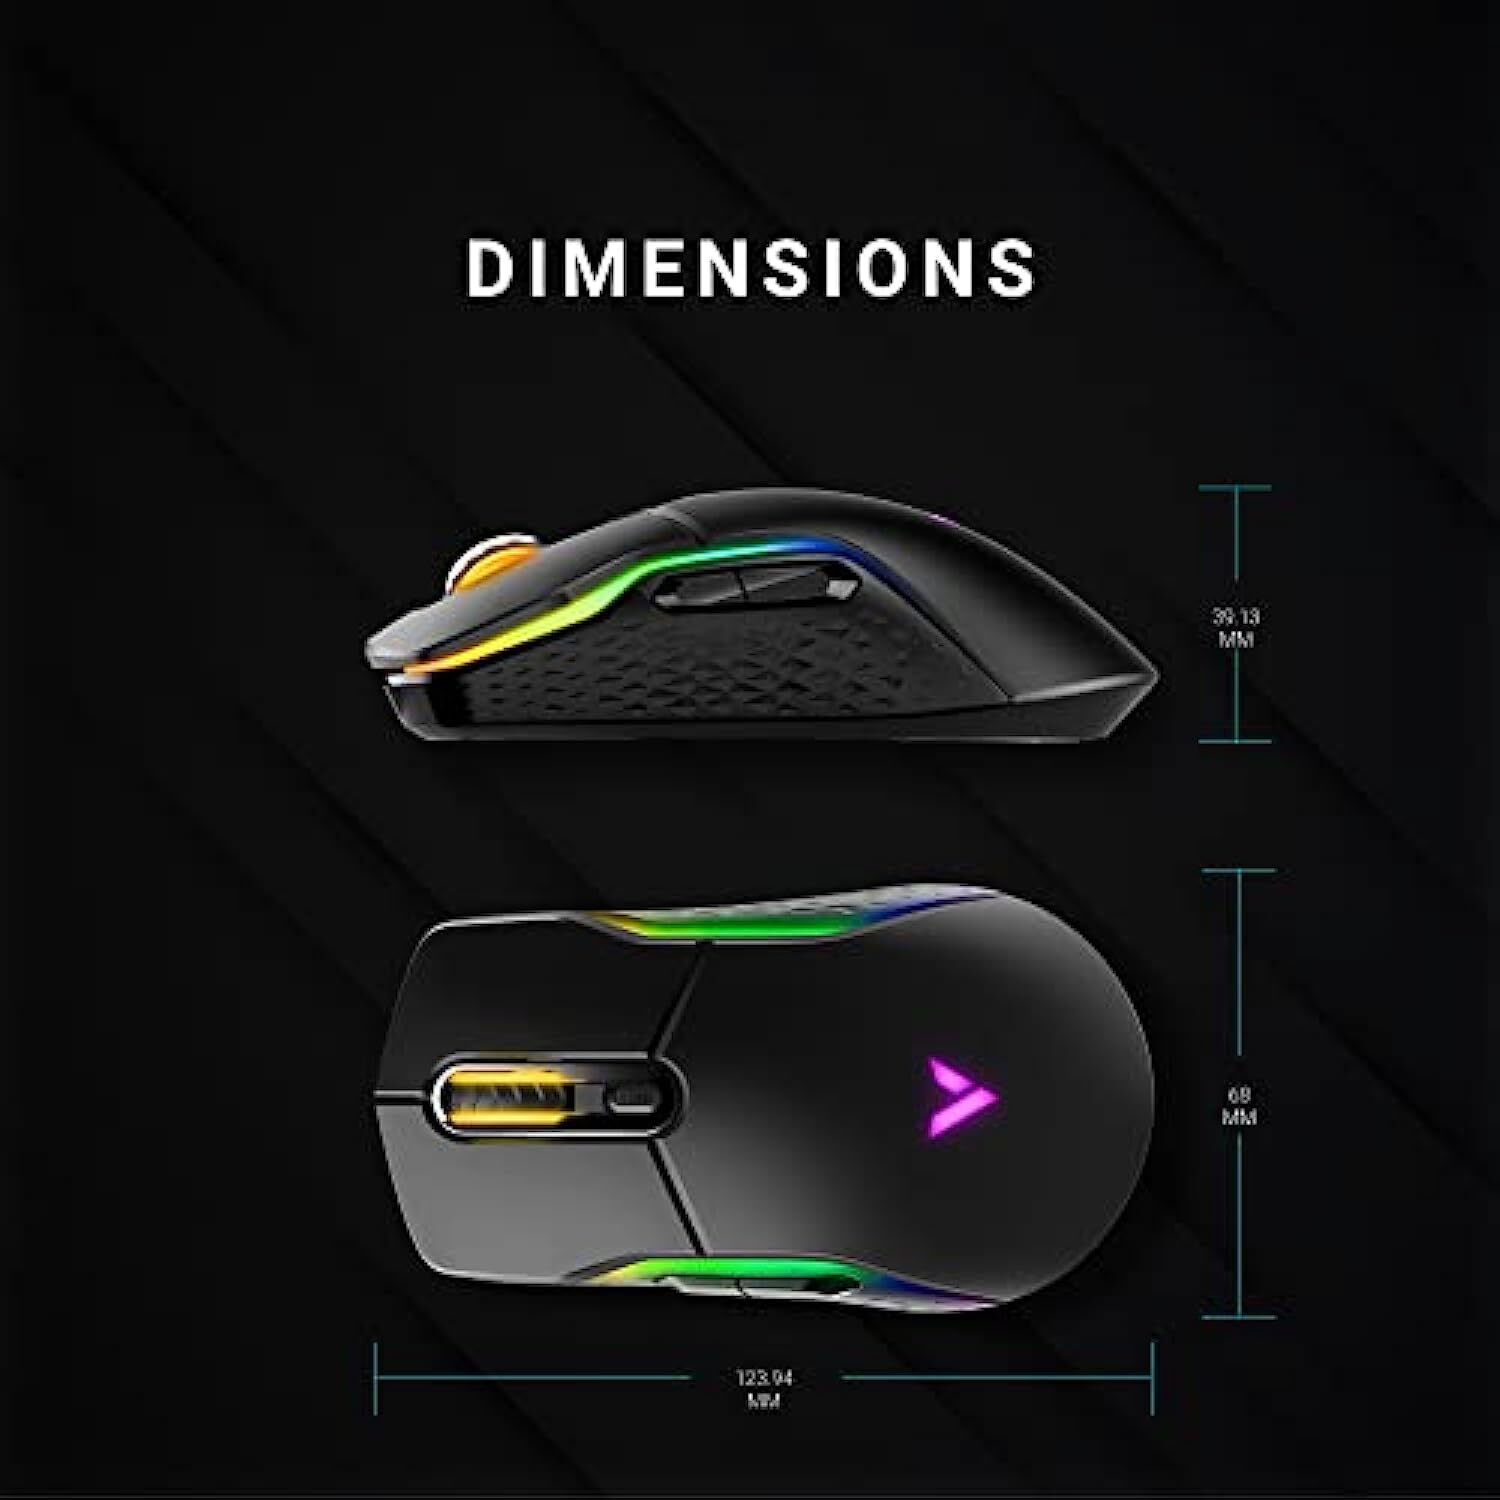 RAPOO VT200 Wired/Wireless Optical Gaming Mouse with Ergonomic Design, 5000 DPI, 7 Programmable Buttons, 1000Hz USB Polling Rate, Onboard Memory, RGB Backlight & Braided Cable.